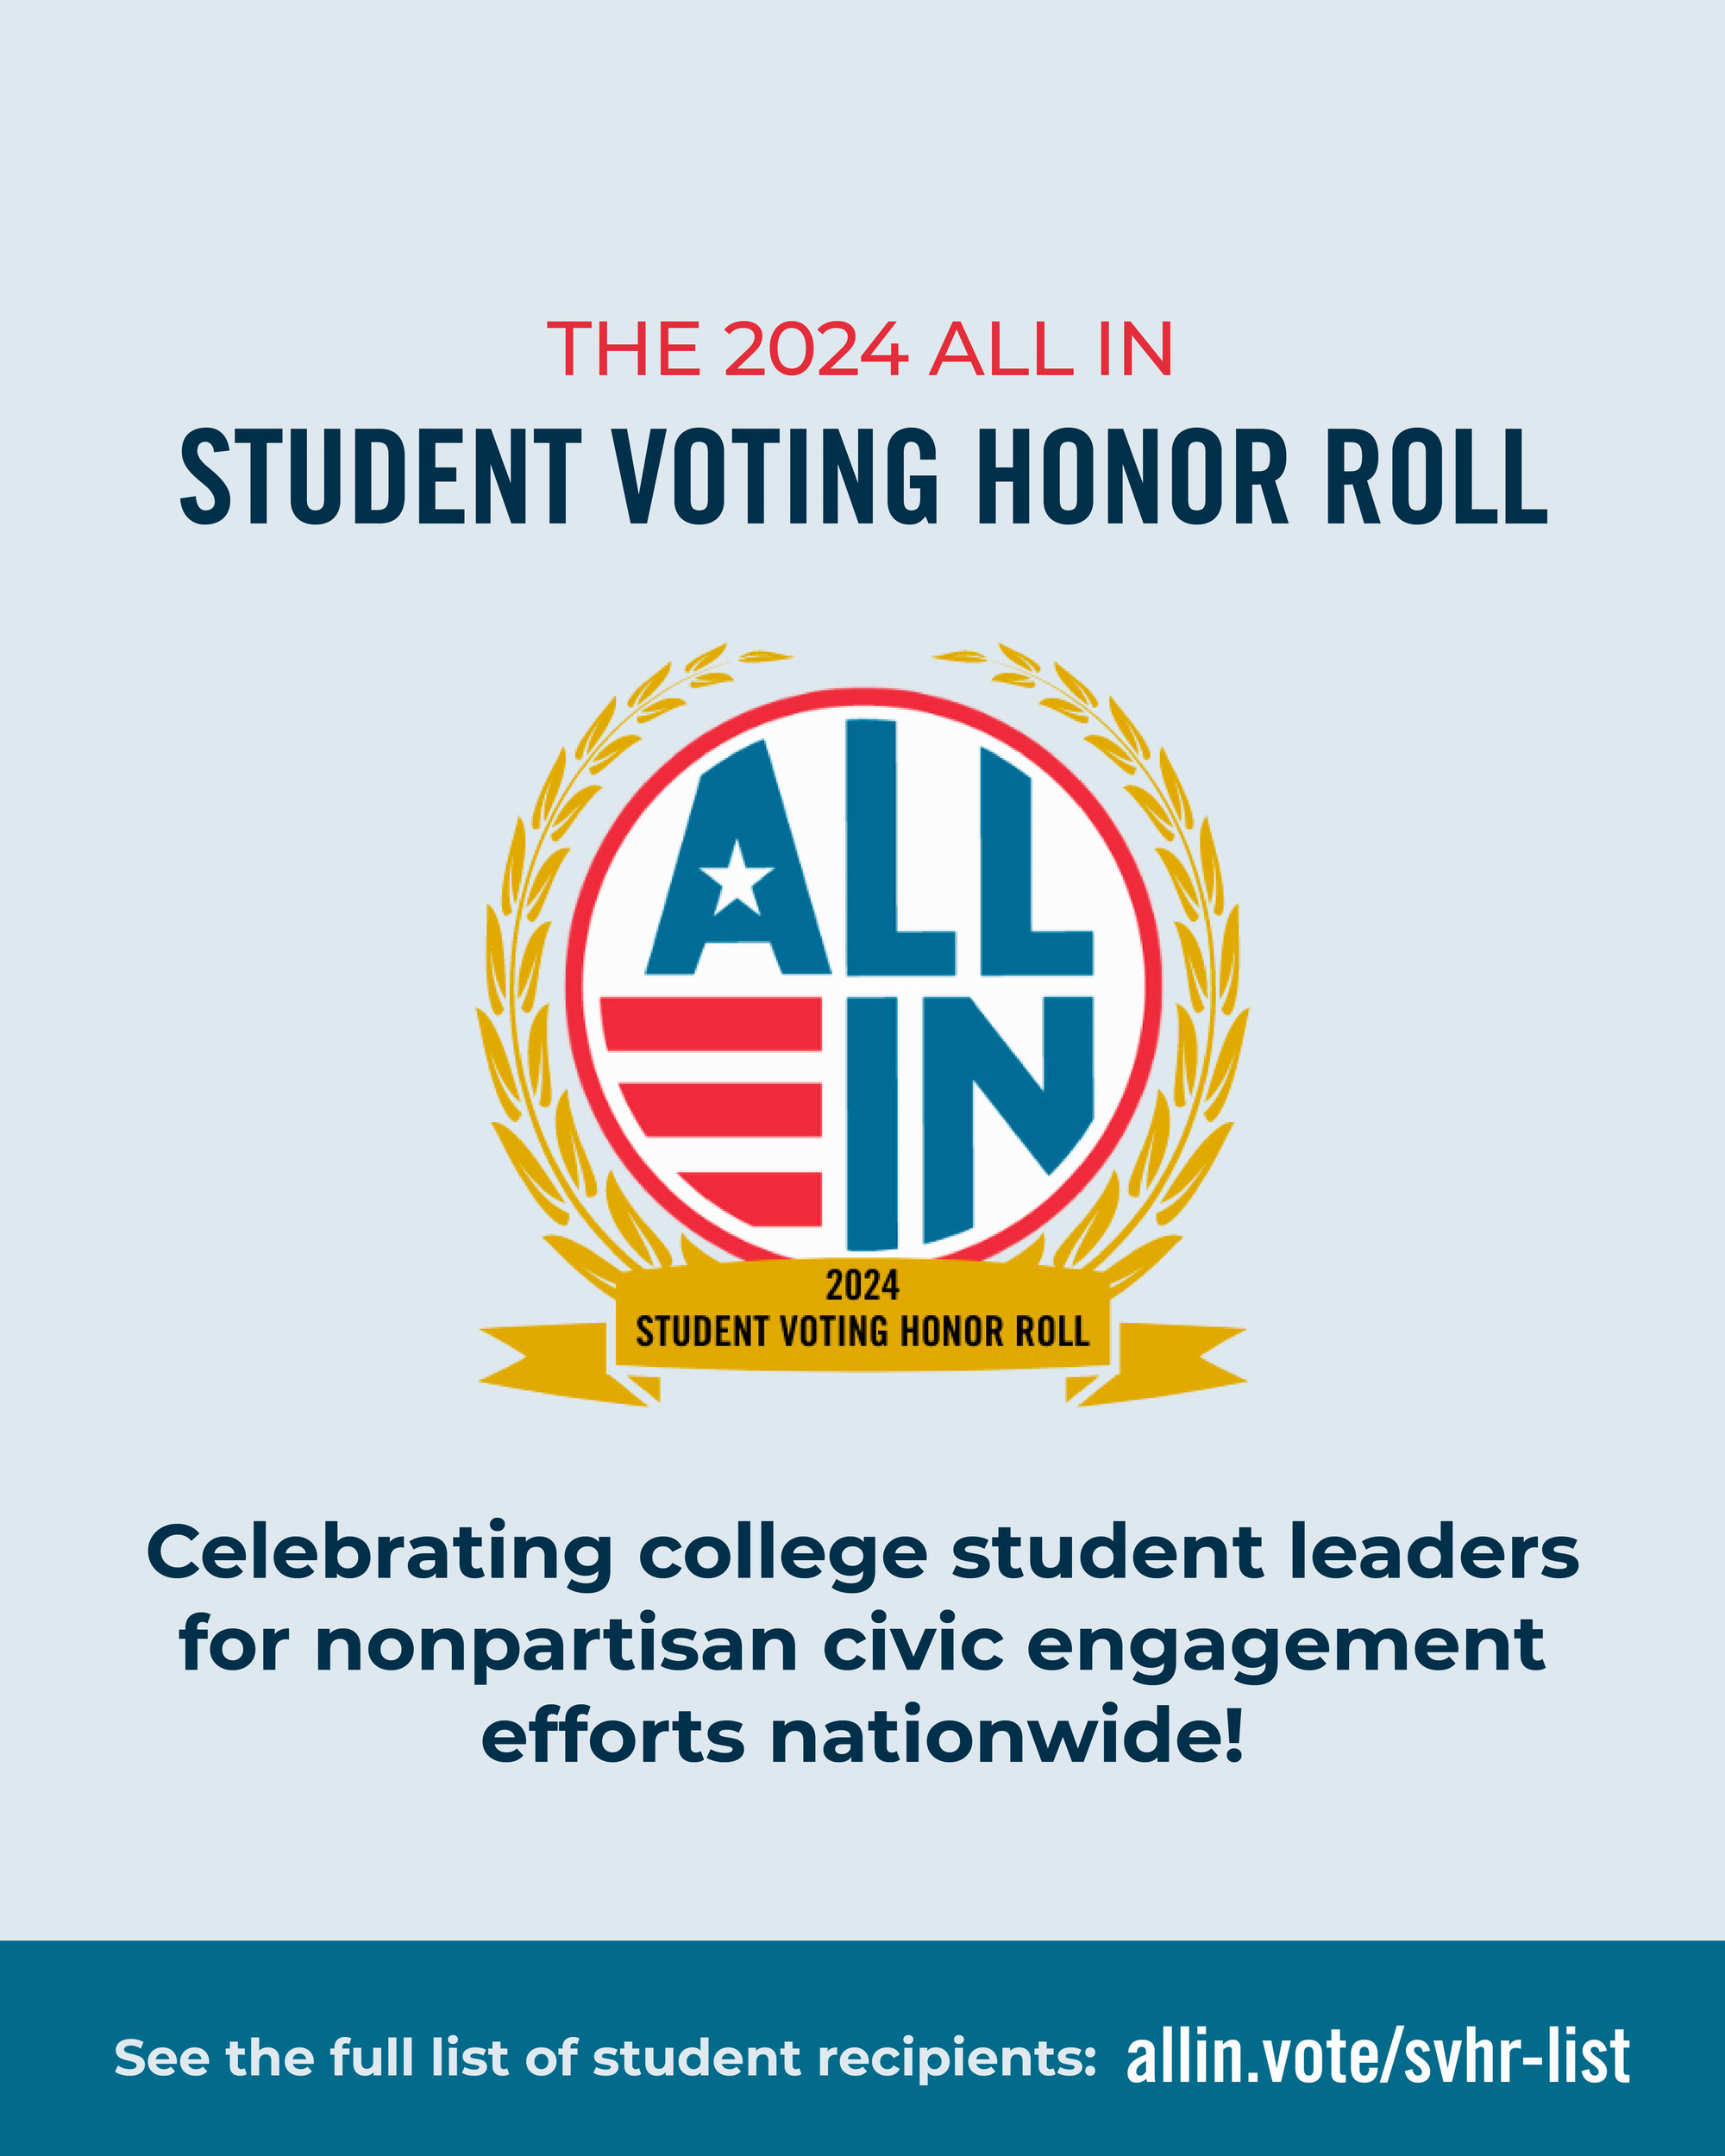 ALL IN Student Voting Honor Roll 2024 logo graphic